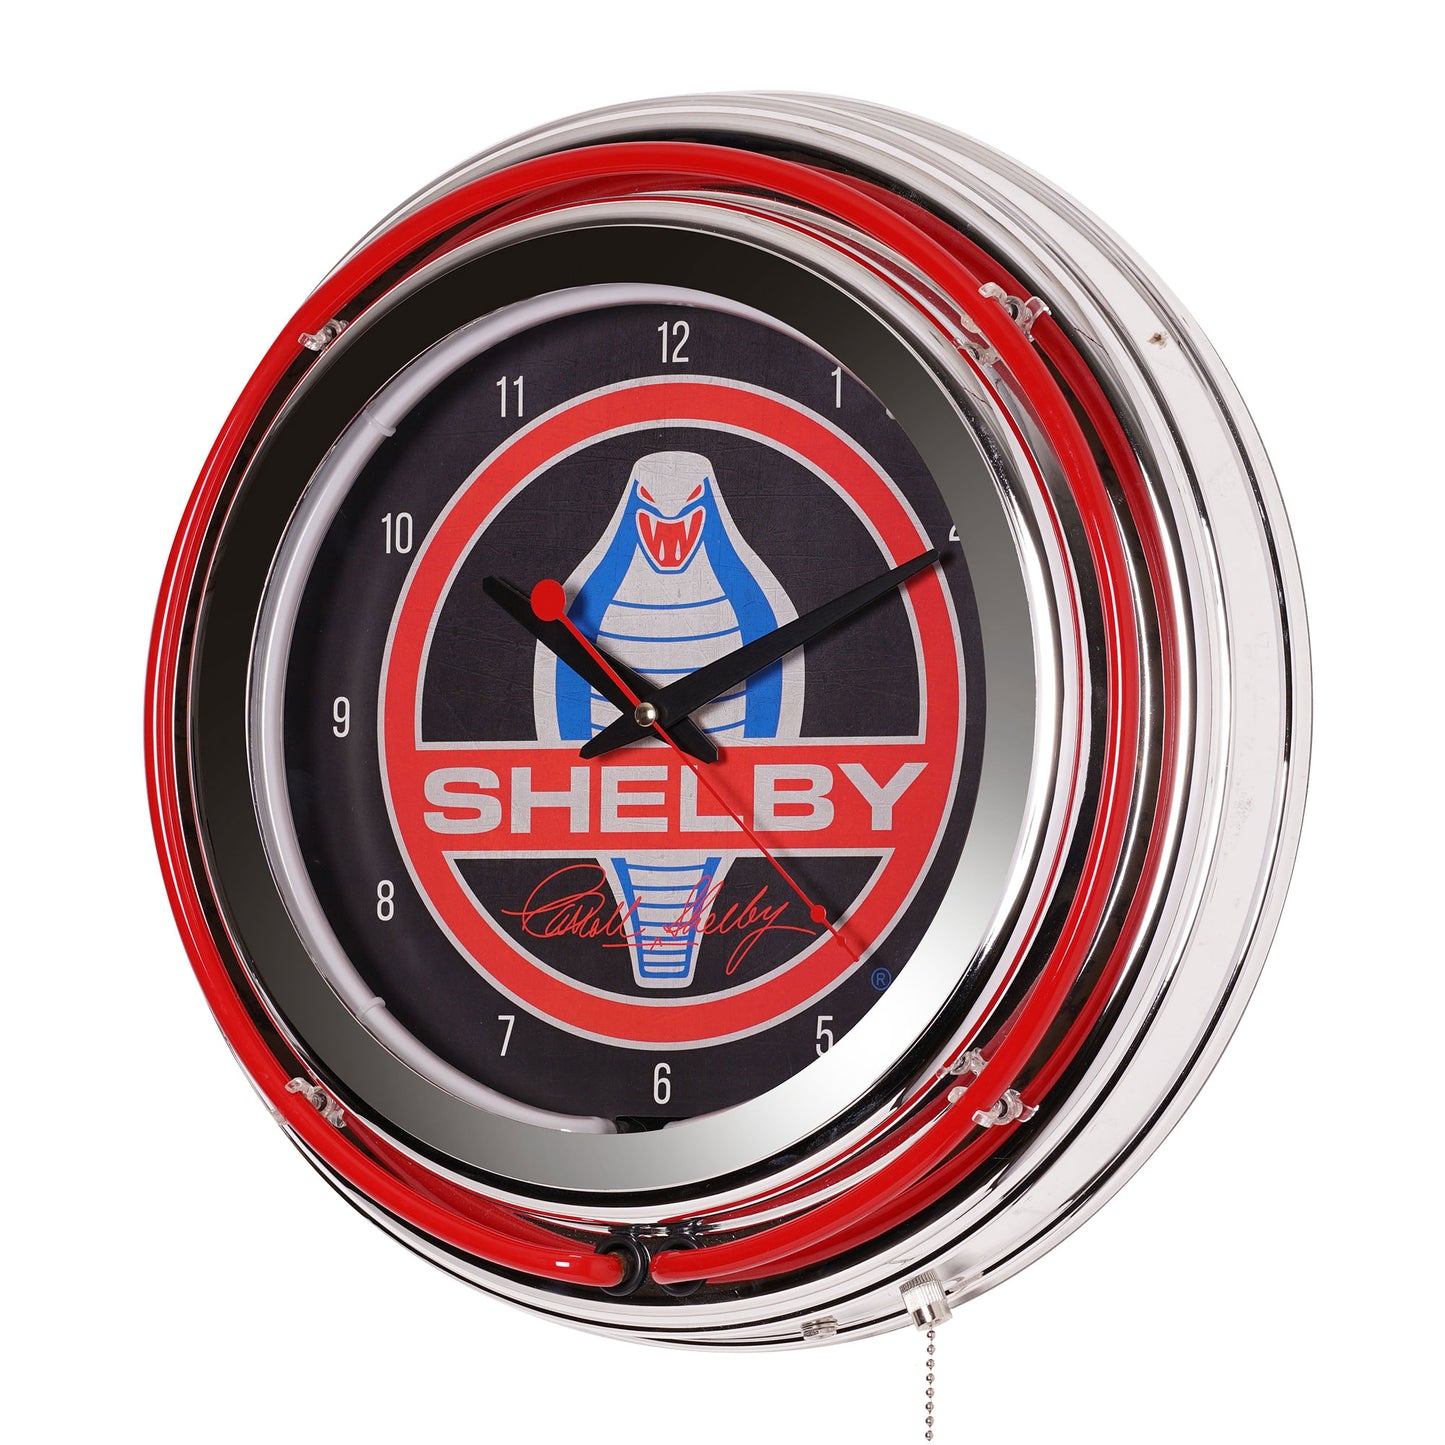 Shelby Retro Round Neon Wall Analog Clock with Pull Chain - 14.5"